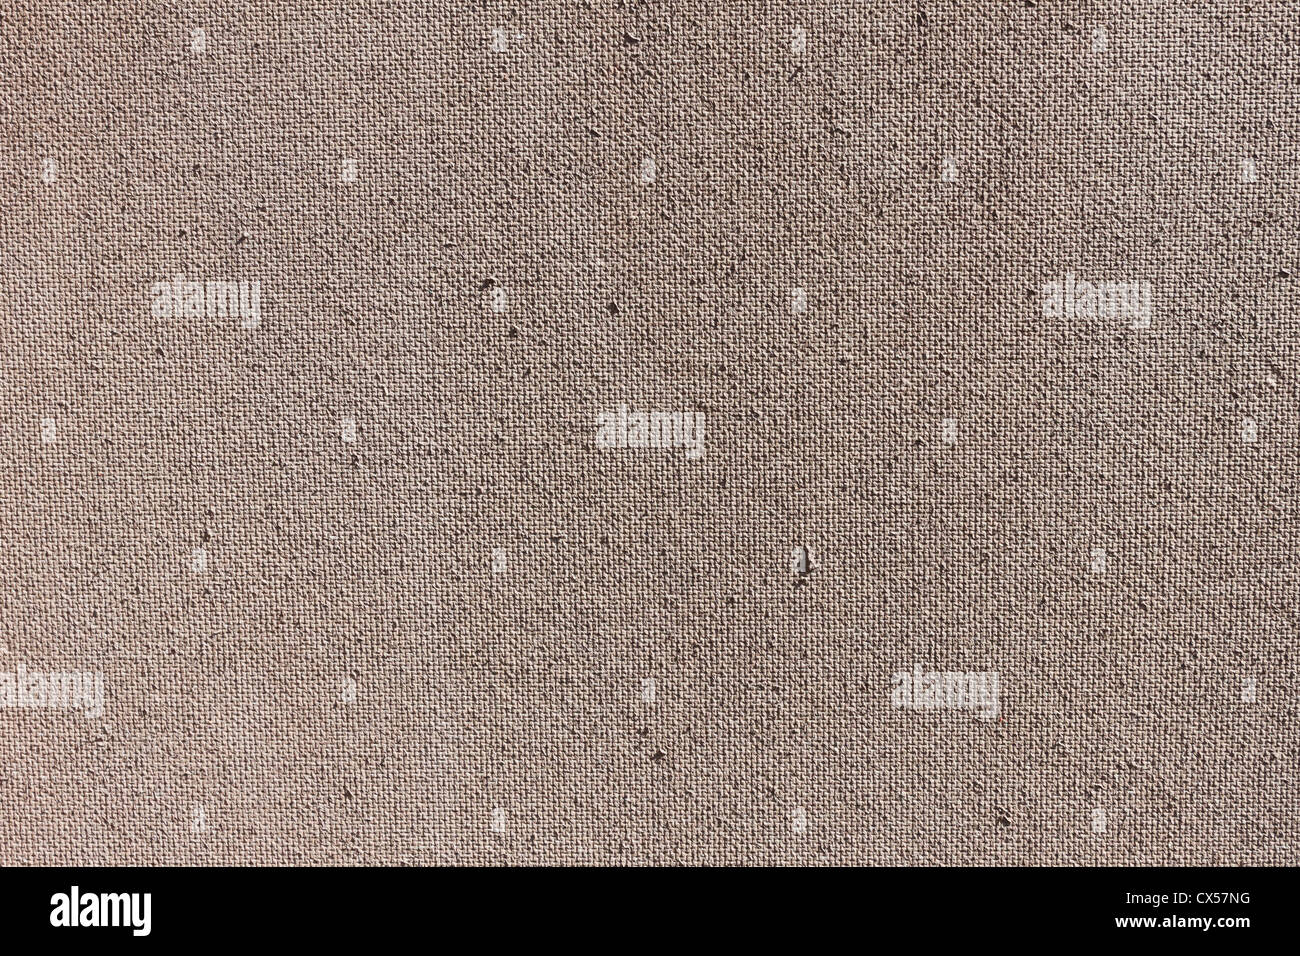 old dirty fabric texture background Stock Photo - Alamy